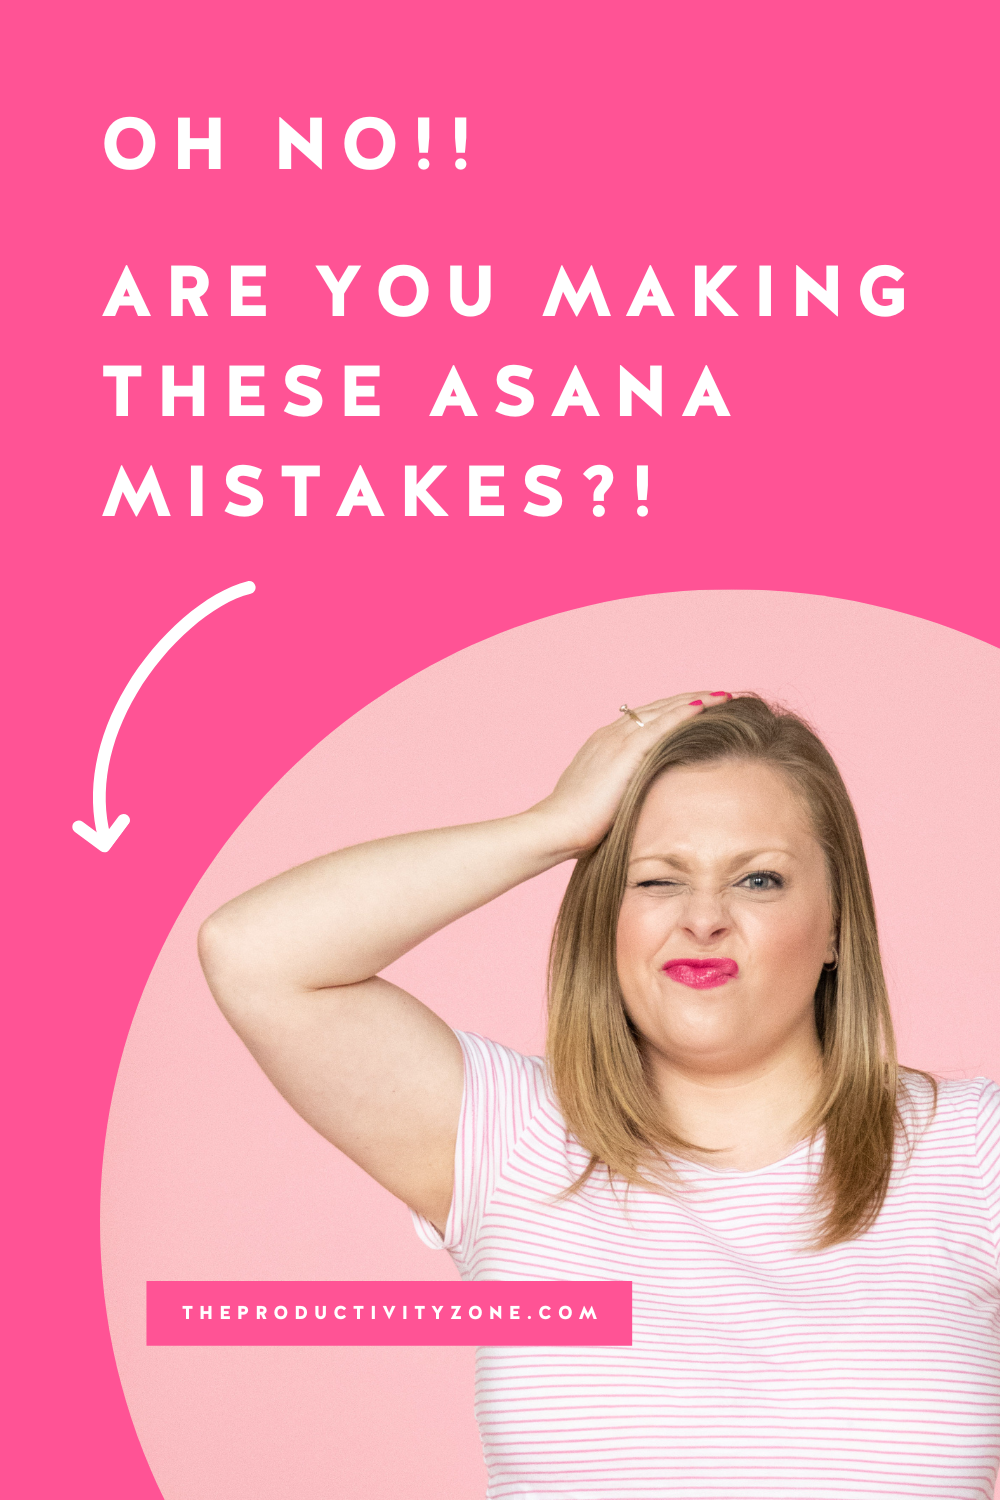 A hot pink background features the headline "Oh No!! Are You Making These Asana Mistakes?!" in bold white letters. There is also a white arrow pointing down to Alexandra of The Productivity Zone making an oh no cringe face.